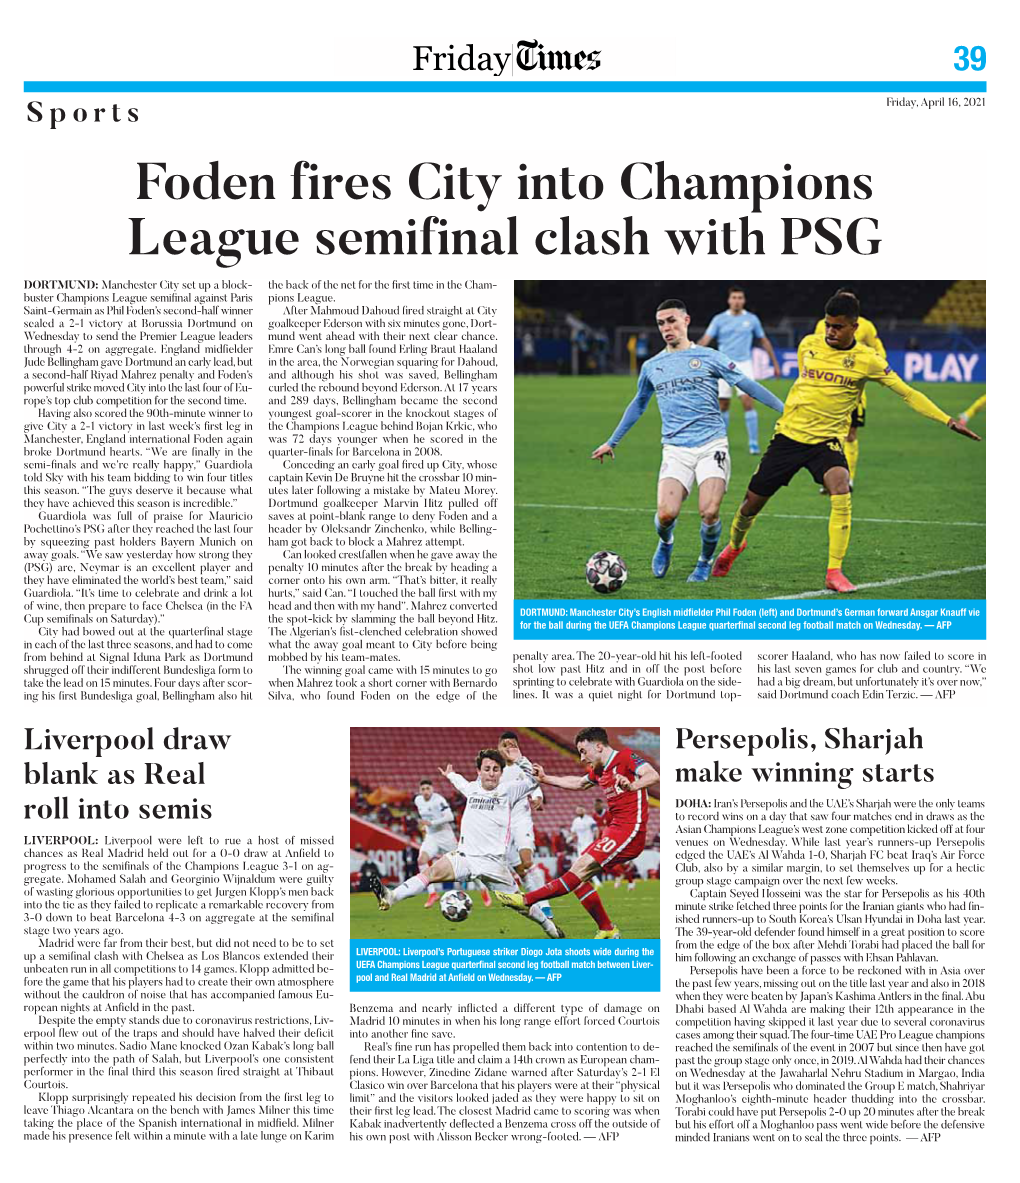 Foden Fires City Into Champions League Semifinal Clash with PSG